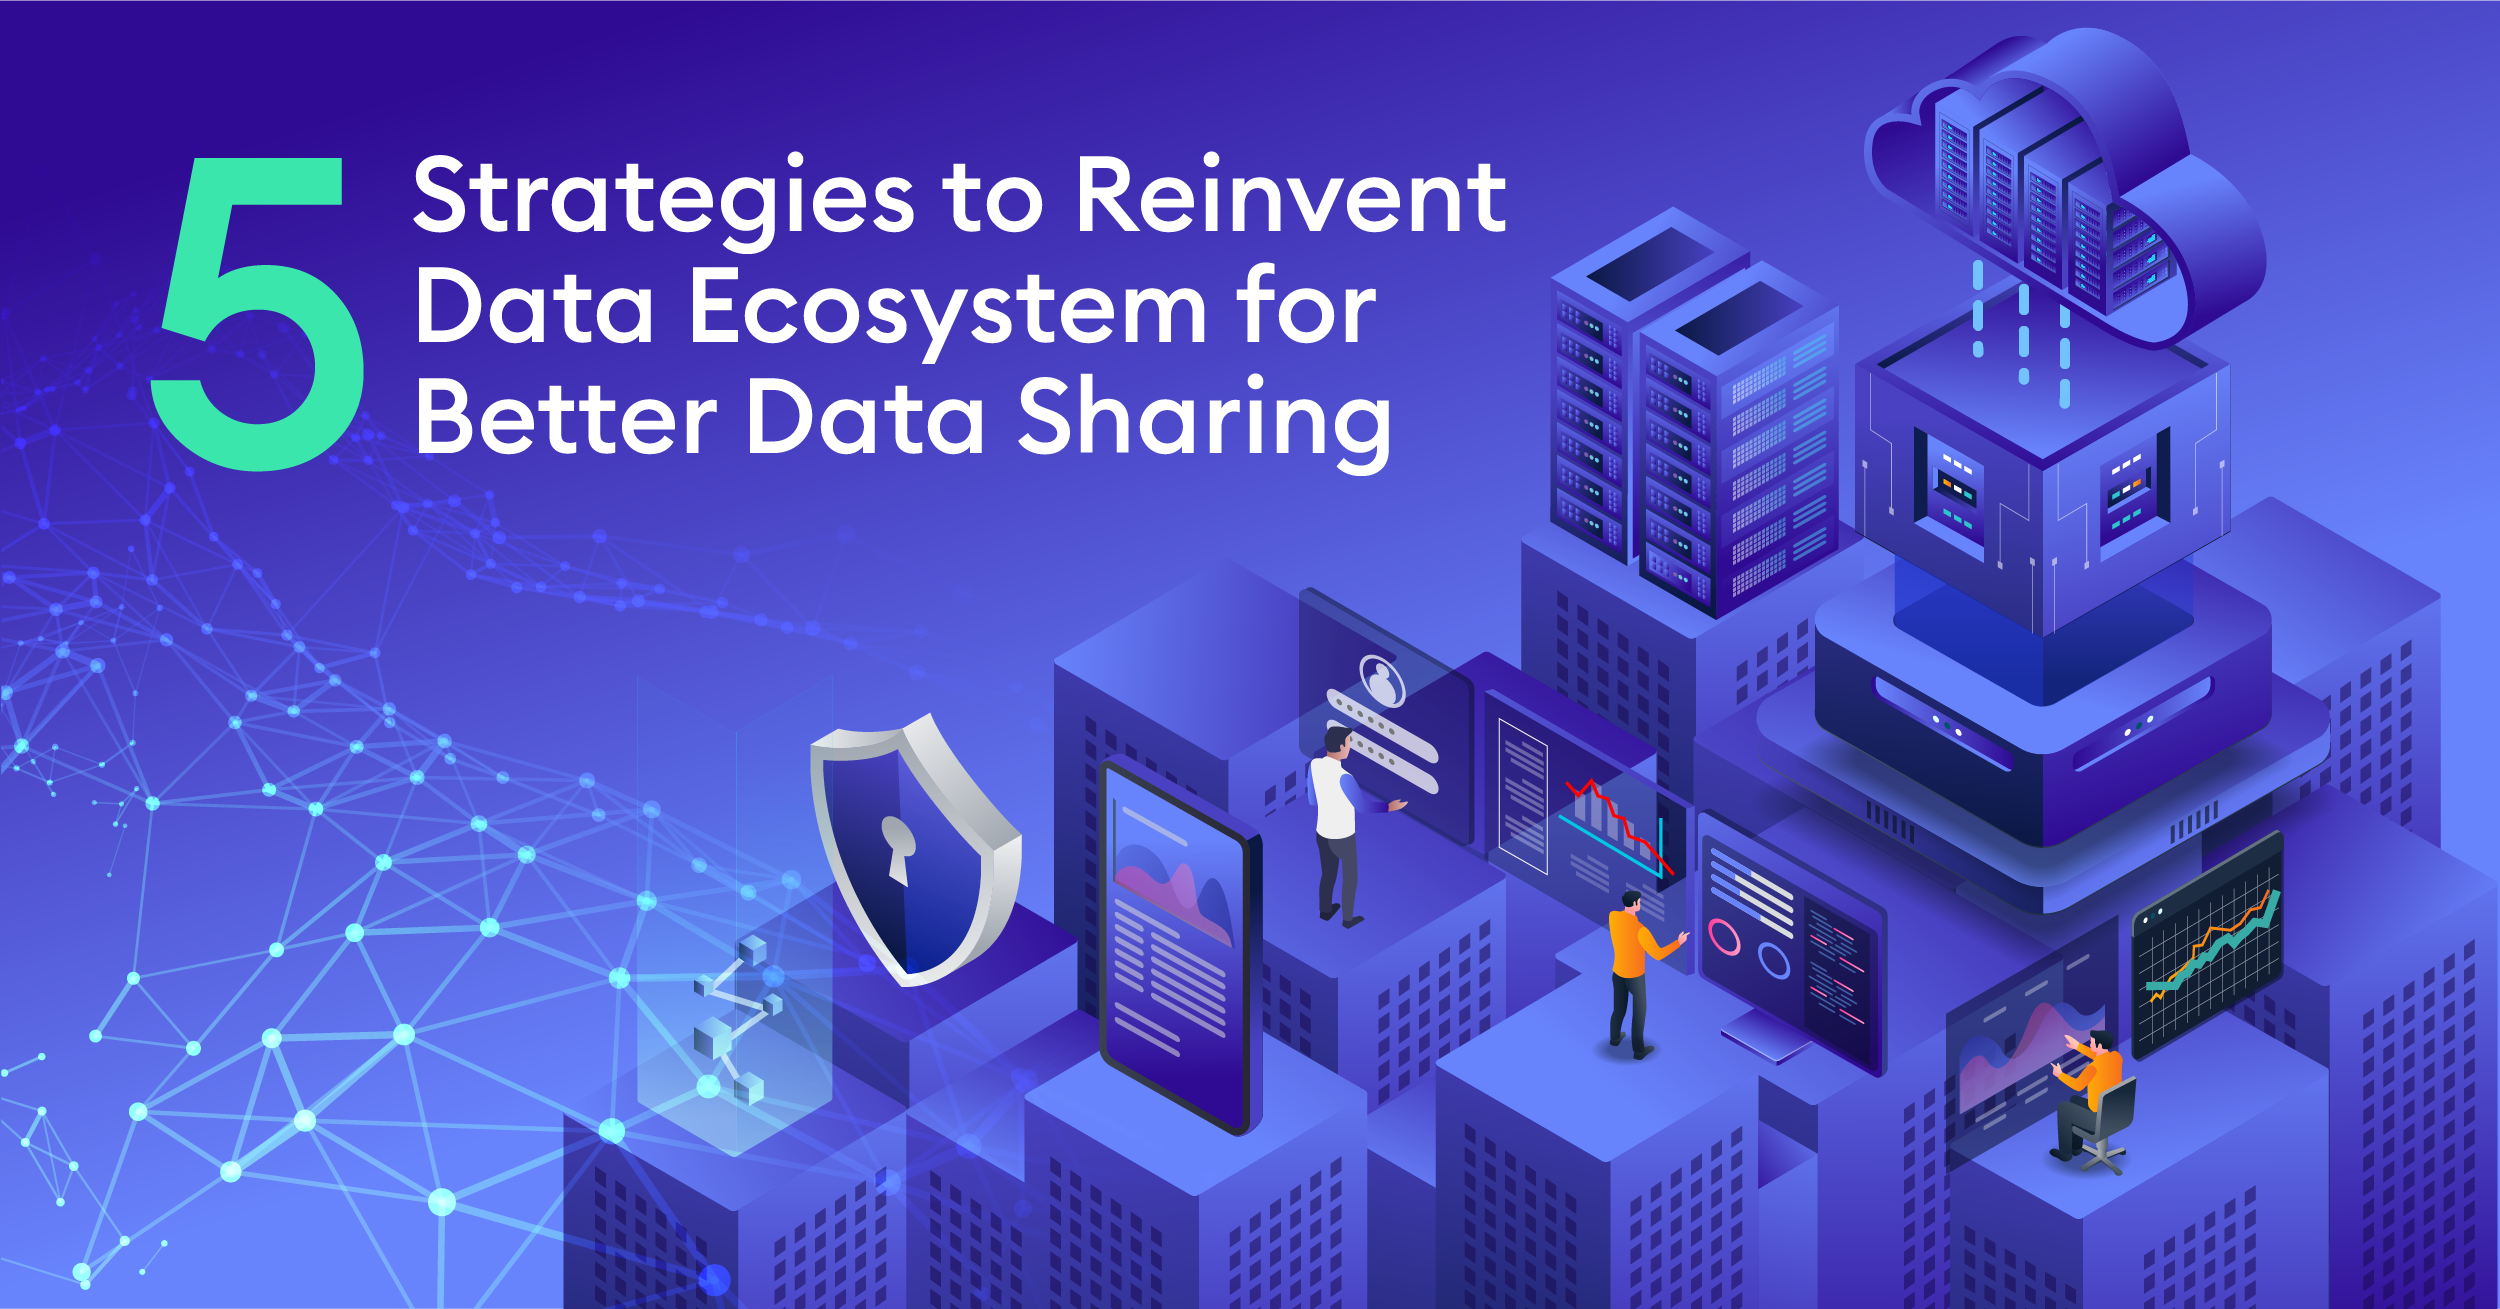 5 Strategies to Reinvent Data Ecosystem for Better Data Sharing